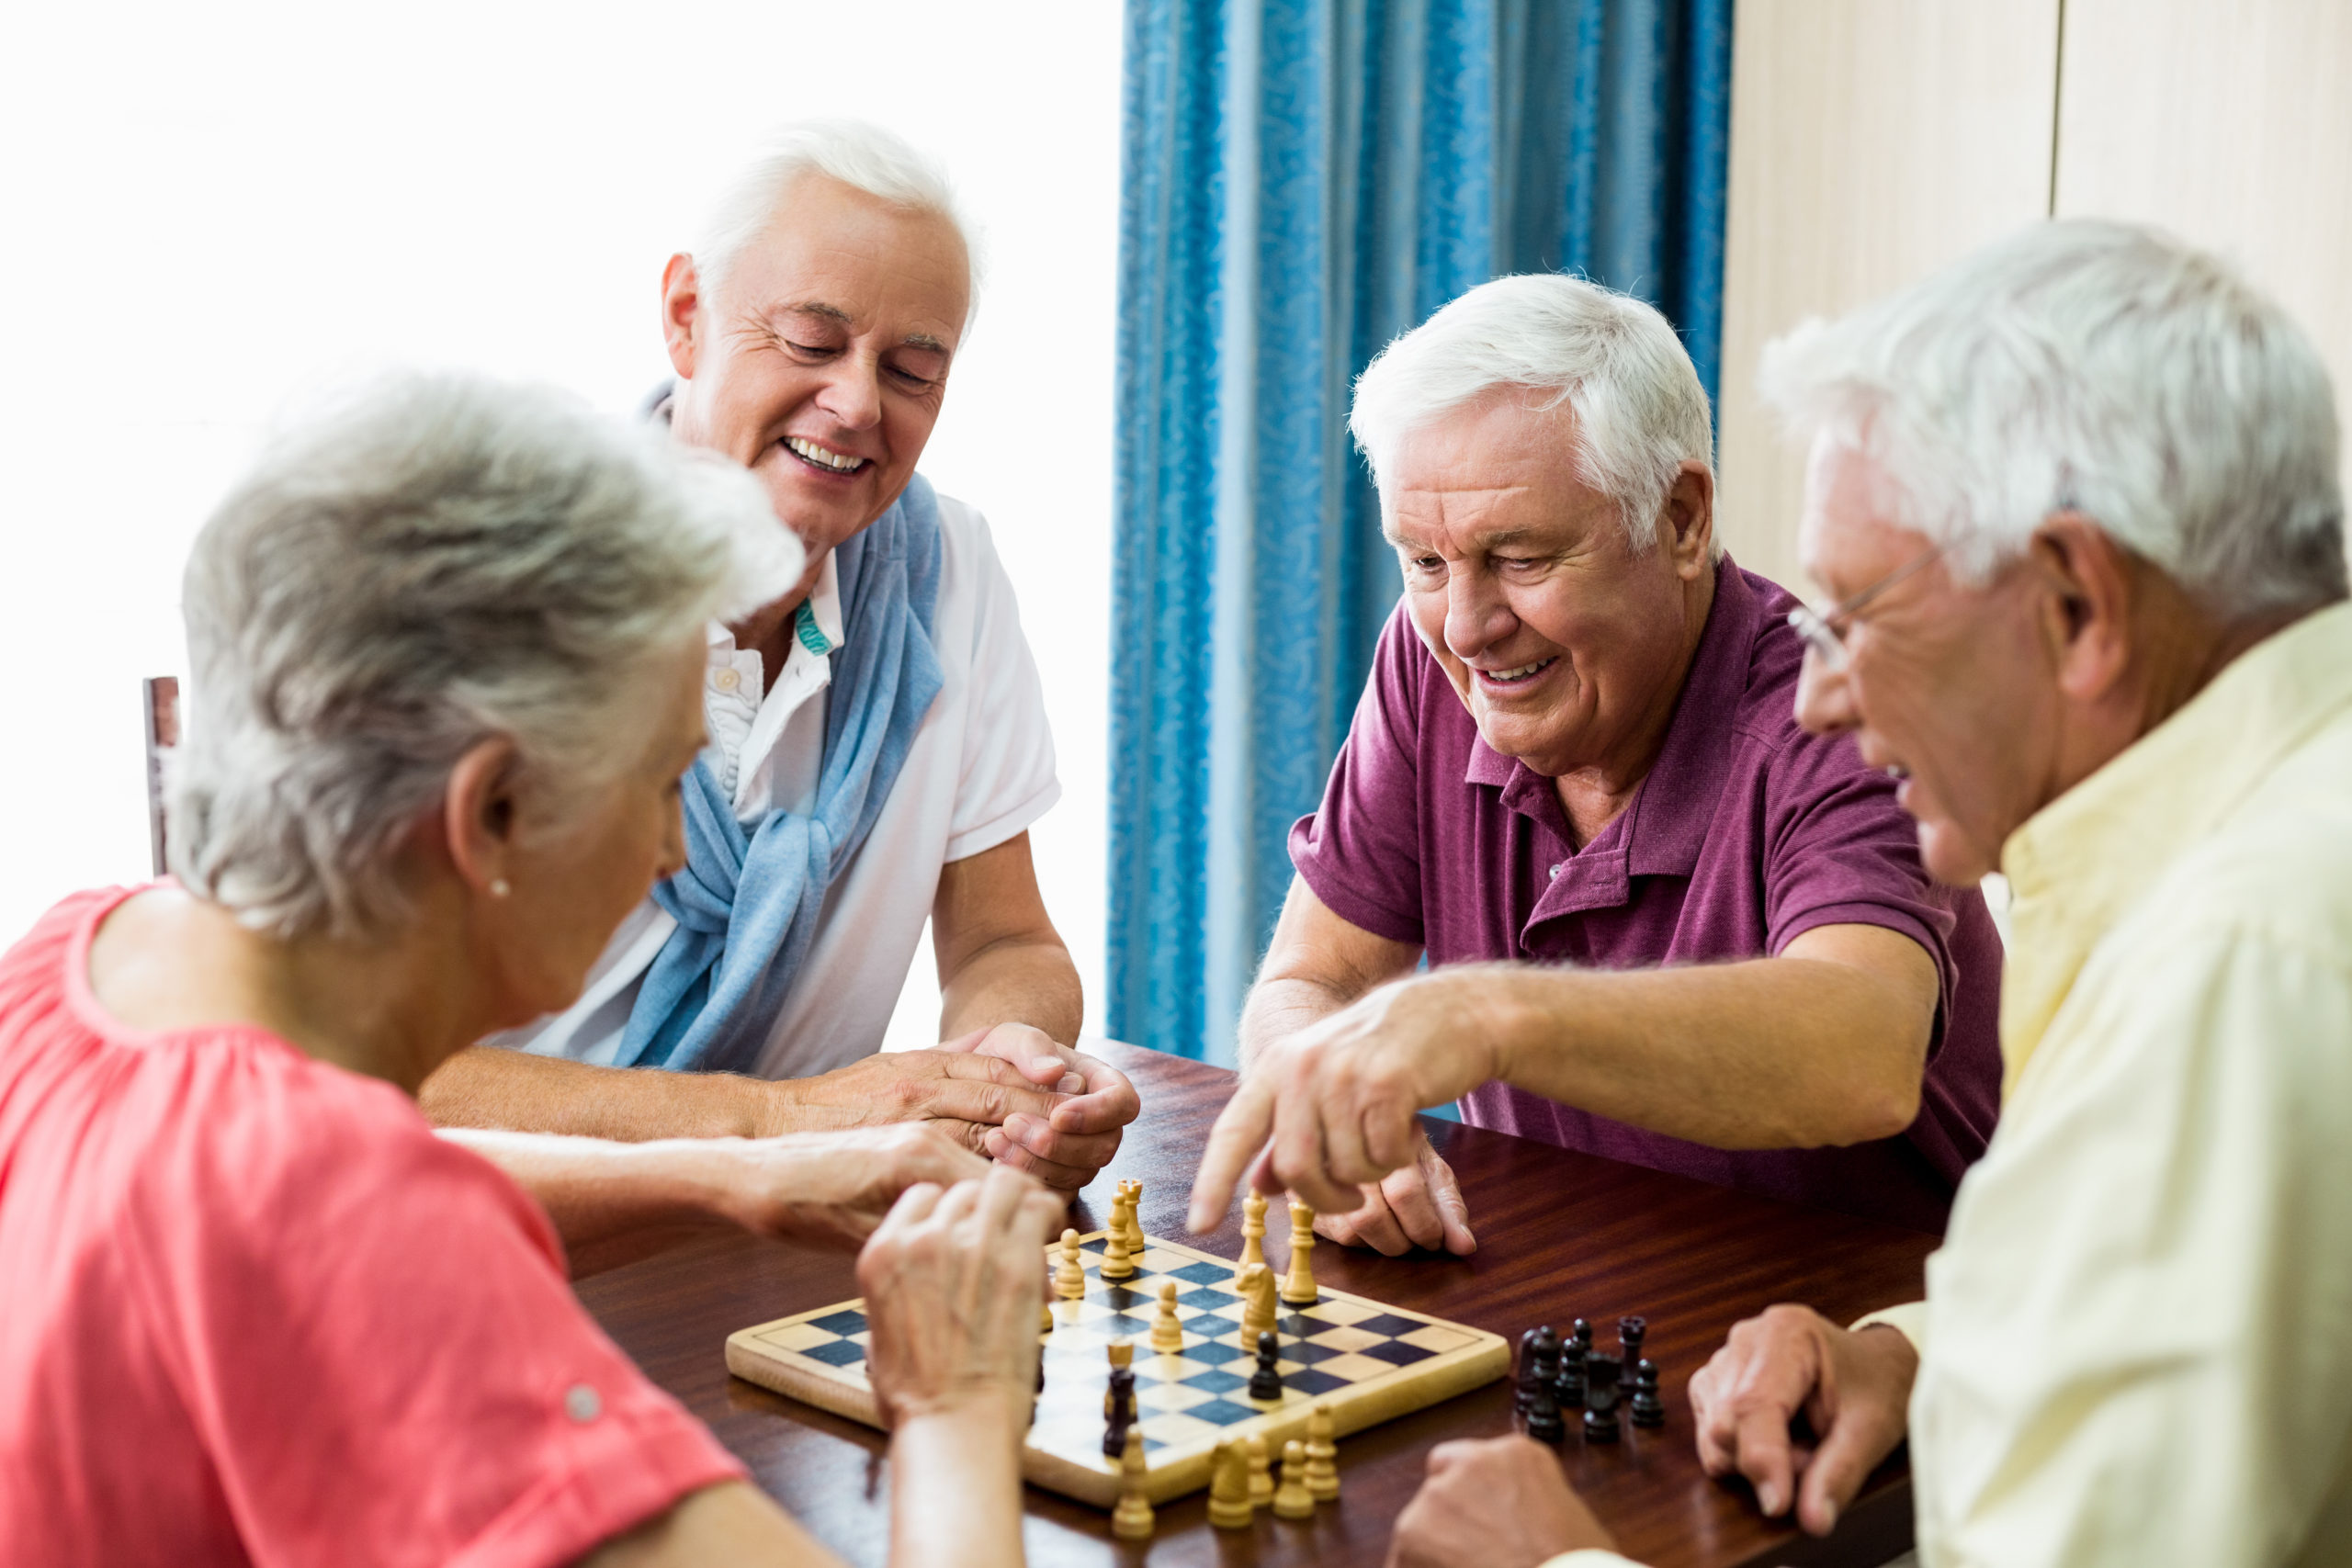 Group of seniors is playing chess and smiling as they have fun together. 